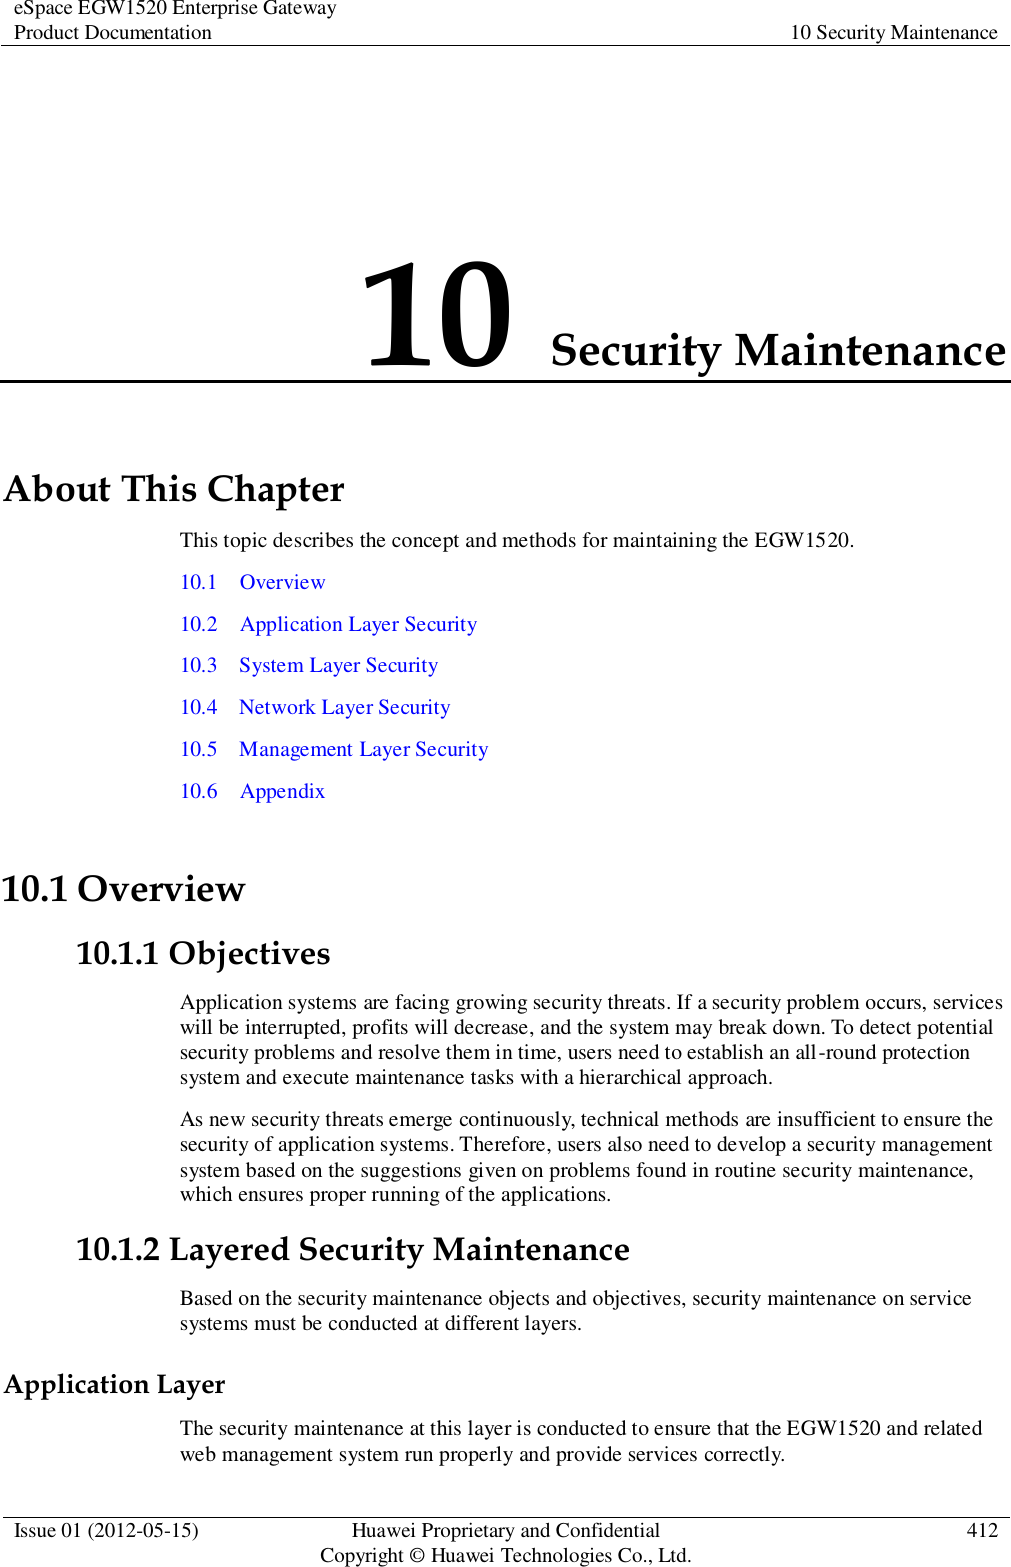 eSpace EGW1520 Enterprise Gateway Product Documentation 10 Security Maintenance  Issue 01 (2012-05-15) Huawei Proprietary and Confidential                                     Copyright © Huawei Technologies Co., Ltd. 412  10 Security Maintenance About This Chapter This topic describes the concept and methods for maintaining the EGW1520.   10.1    Overview 10.2    Application Layer Security 10.3    System Layer Security 10.4    Network Layer Security 10.5    Management Layer Security 10.6    Appendix 10.1 Overview 10.1.1 Objectives Application systems are facing growing security threats. If a security problem occurs, services will be interrupted, profits will decrease, and the system may break down. To detect potential security problems and resolve them in time, users need to establish an all-round protection system and execute maintenance tasks with a hierarchical approach. As new security threats emerge continuously, technical methods are insufficient to ensure the security of application systems. Therefore, users also need to develop a security management system based on the suggestions given on problems found in routine security maintenance, which ensures proper running of the applications. 10.1.2 Layered Security Maintenance Based on the security maintenance objects and objectives, security maintenance on service systems must be conducted at different layers. Application Layer The security maintenance at this layer is conducted to ensure that the EGW1520 and related web management system run properly and provide services correctly. 